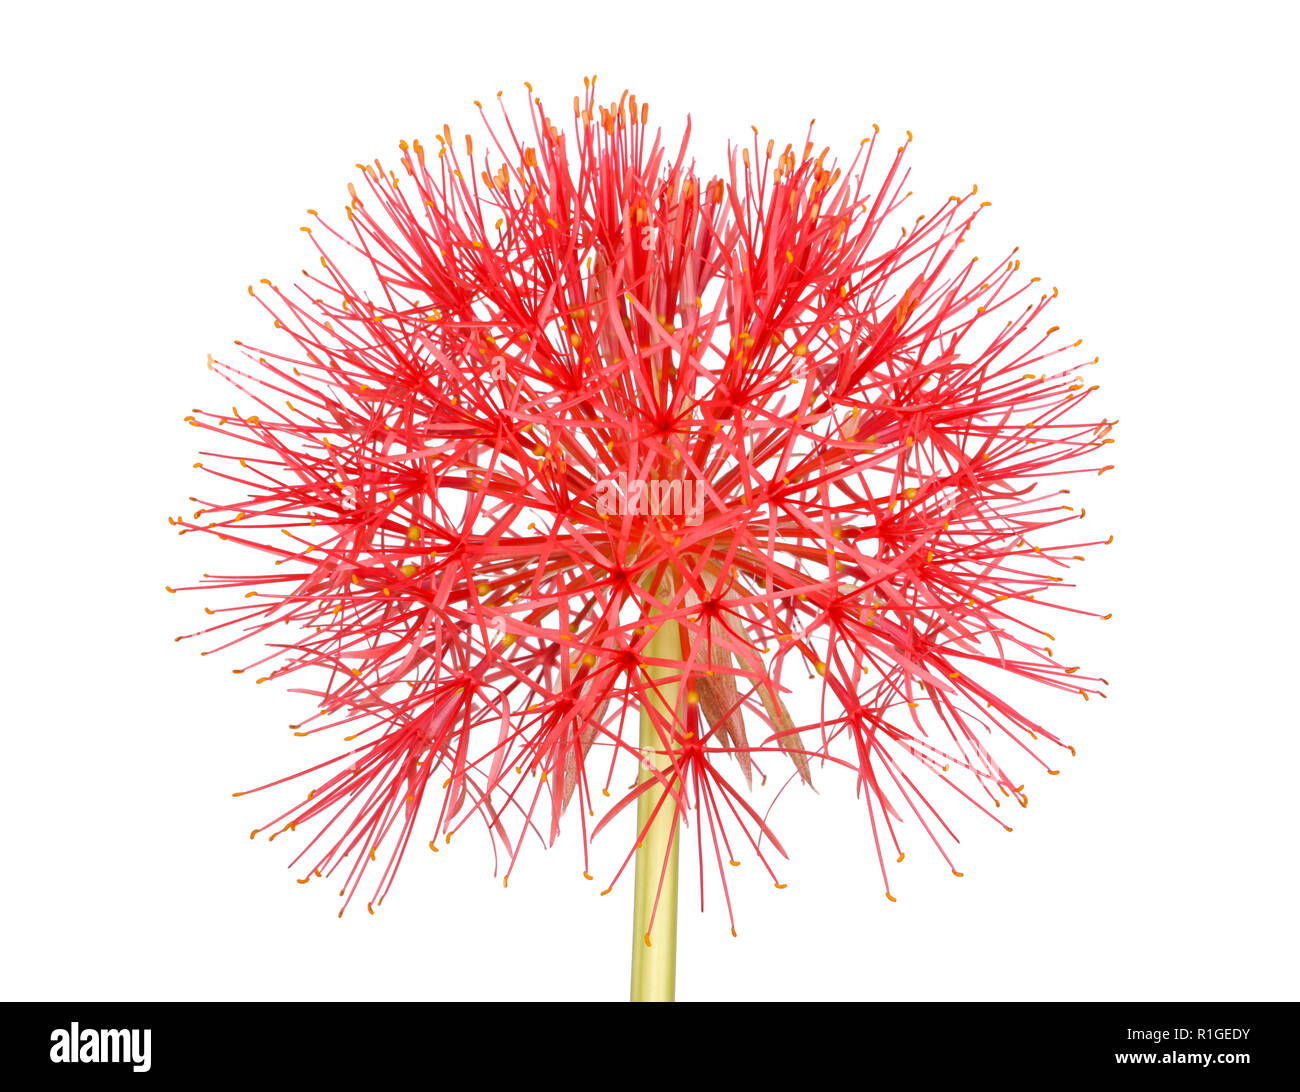 Single compound flower head of the southern African blood lily, Scadoxus multiflorus (formerly Haemanthus multiflorus), isolated against a white backg Stock Photo